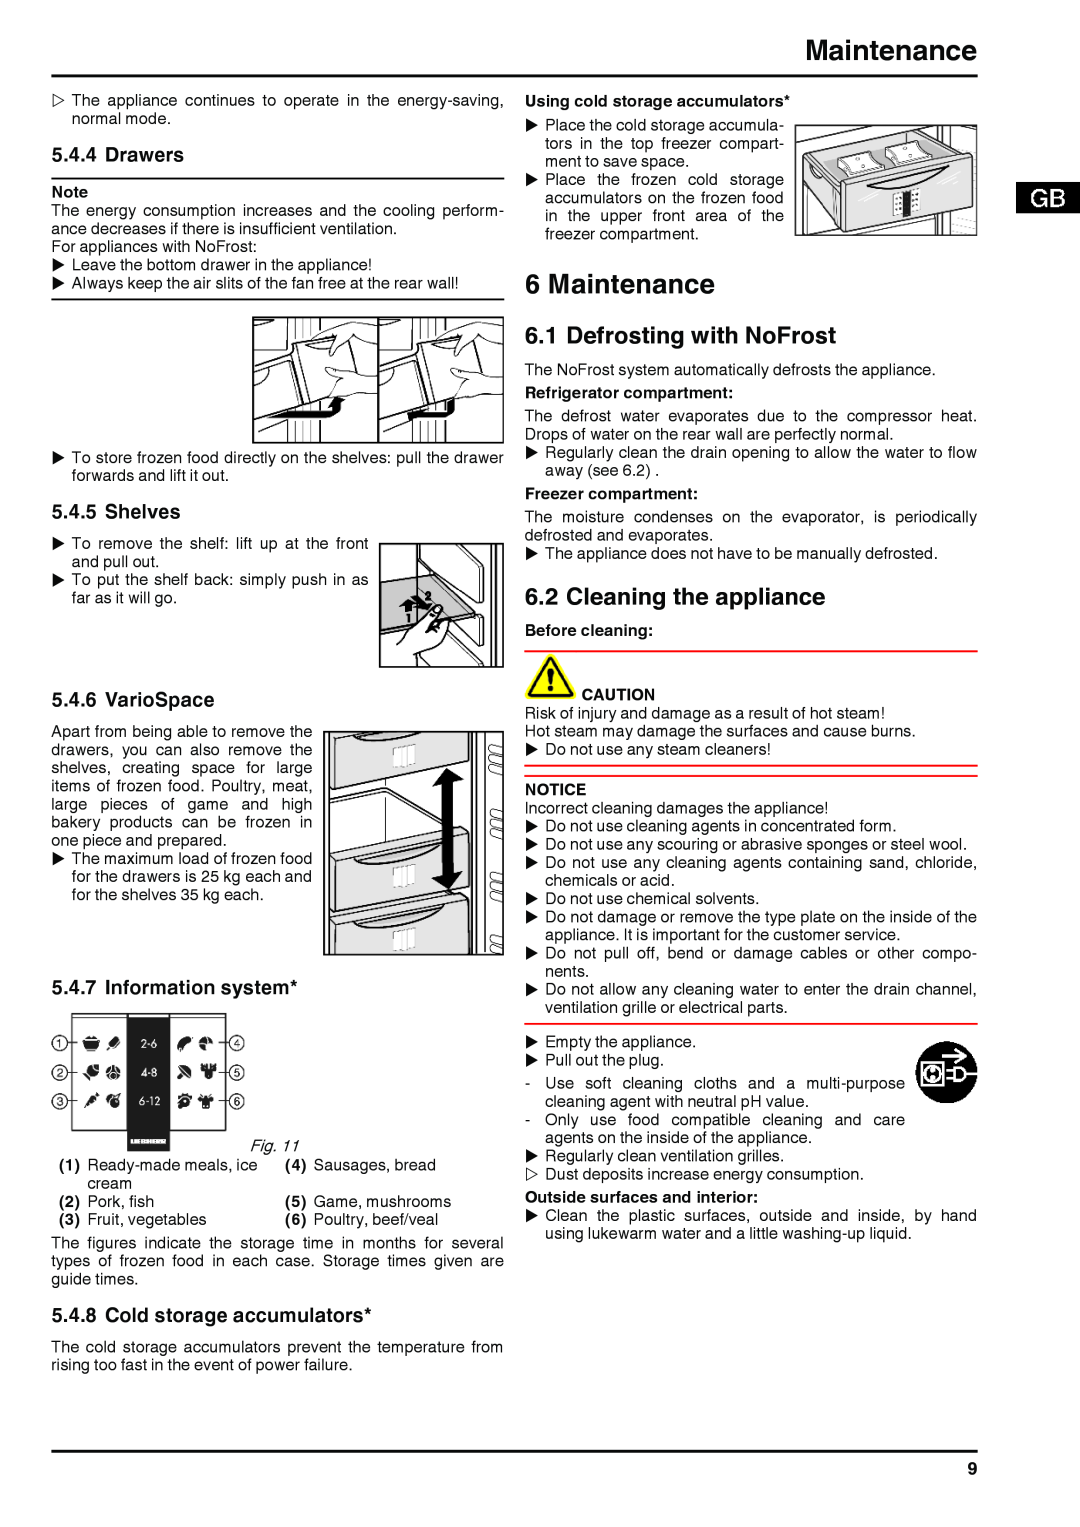 Liebherr 290910 7084364 - 03 Maintenance, Defrosting with NoFrost, Cleaning the appliance, Drawers, Shelves, VarioSpace 